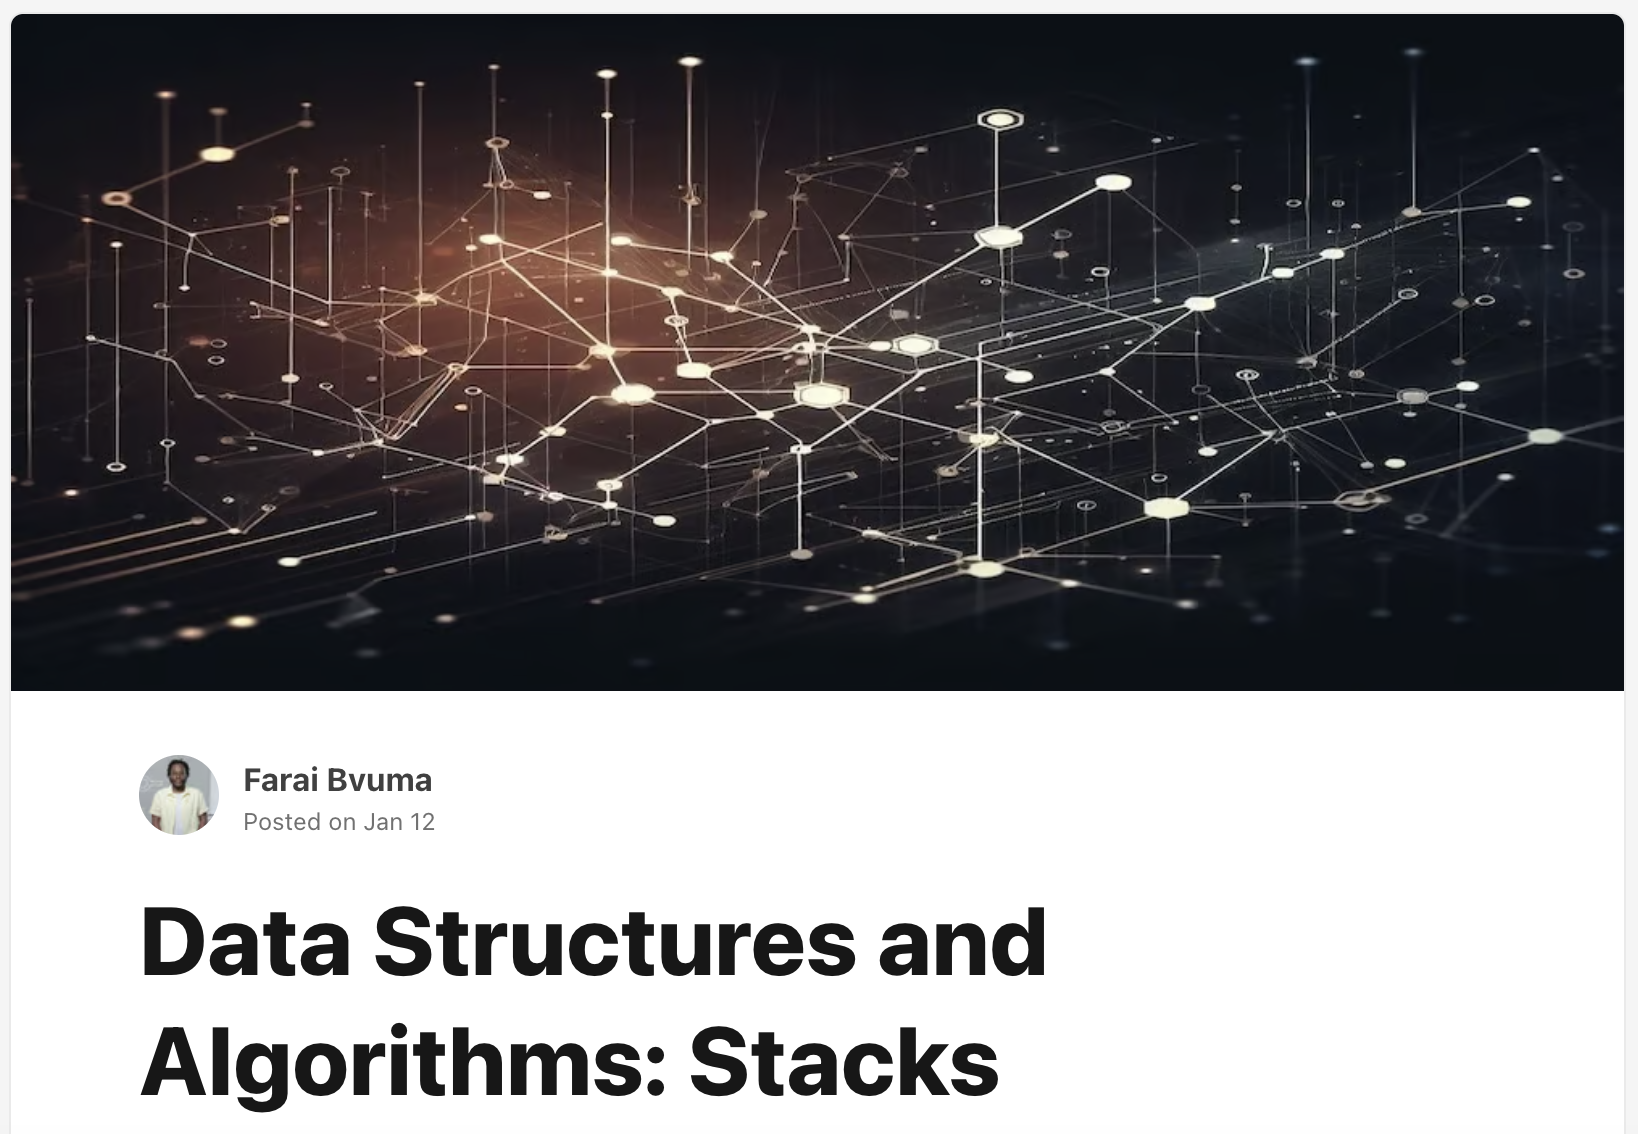 Data Structures and Algorithms: Stacks